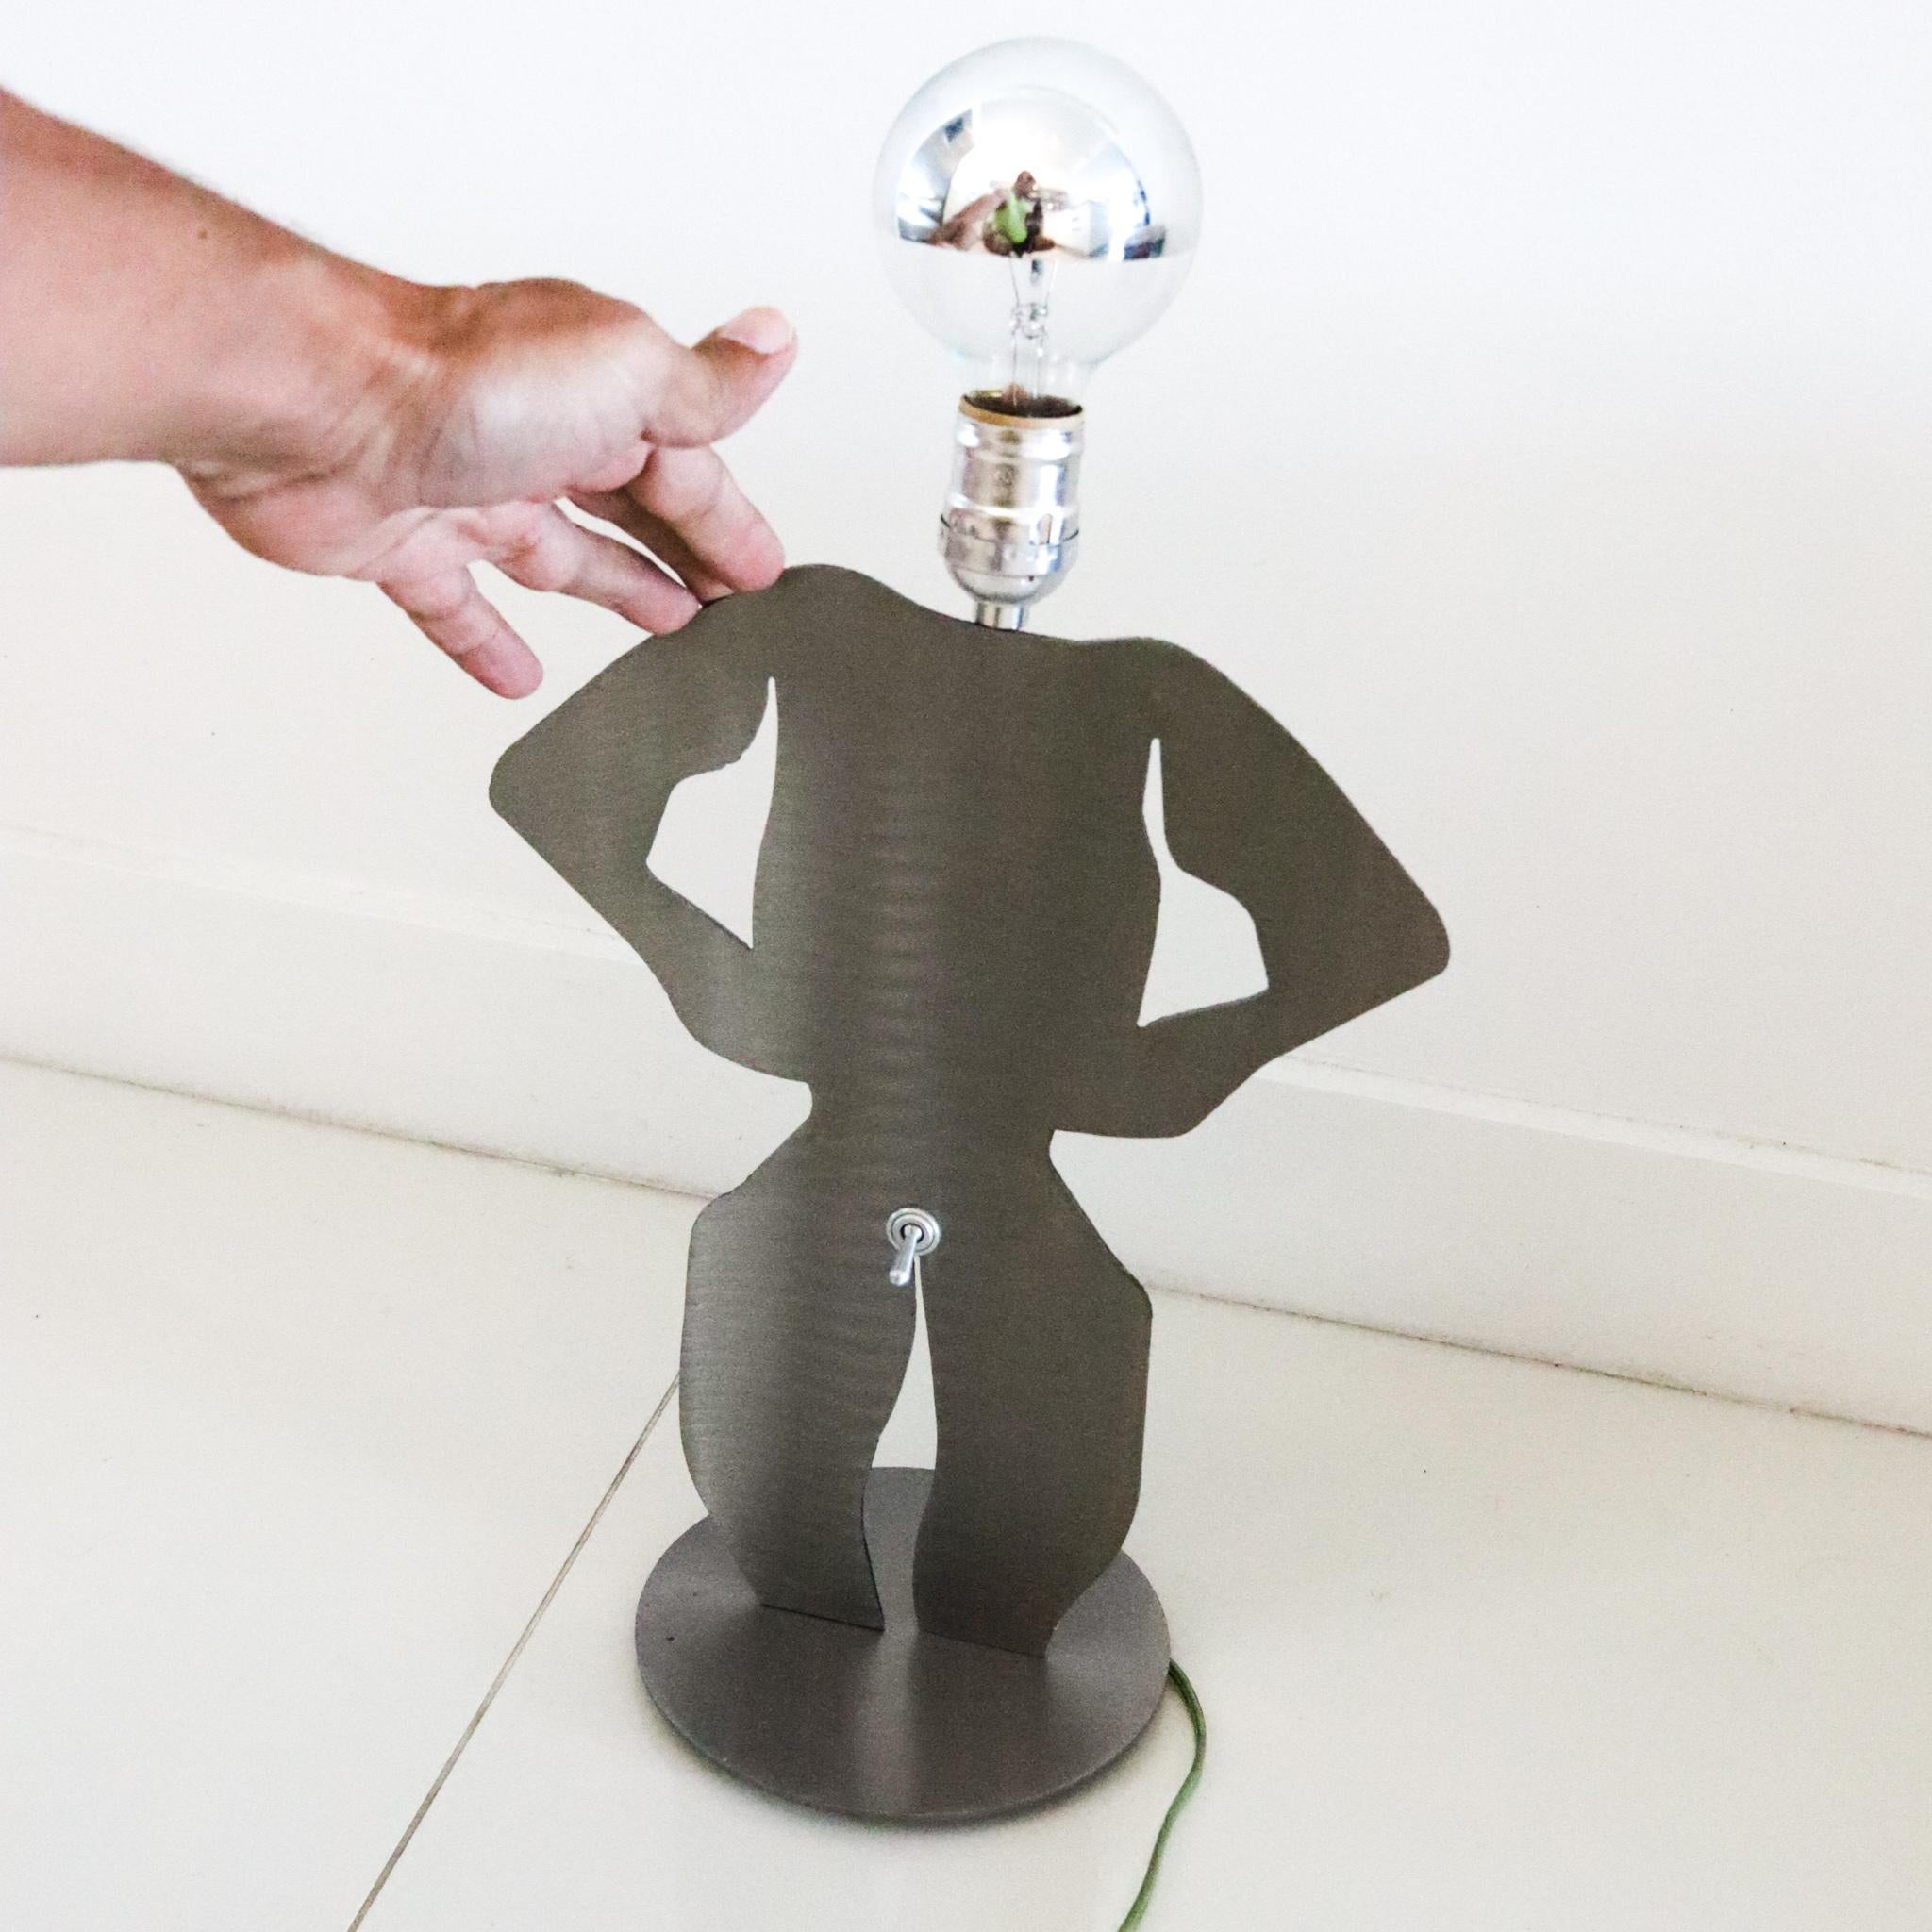 North American Postmodernist 1980 Memphis Pop-Art Lamp In Stainless Steel In The Shape of Man For Sale